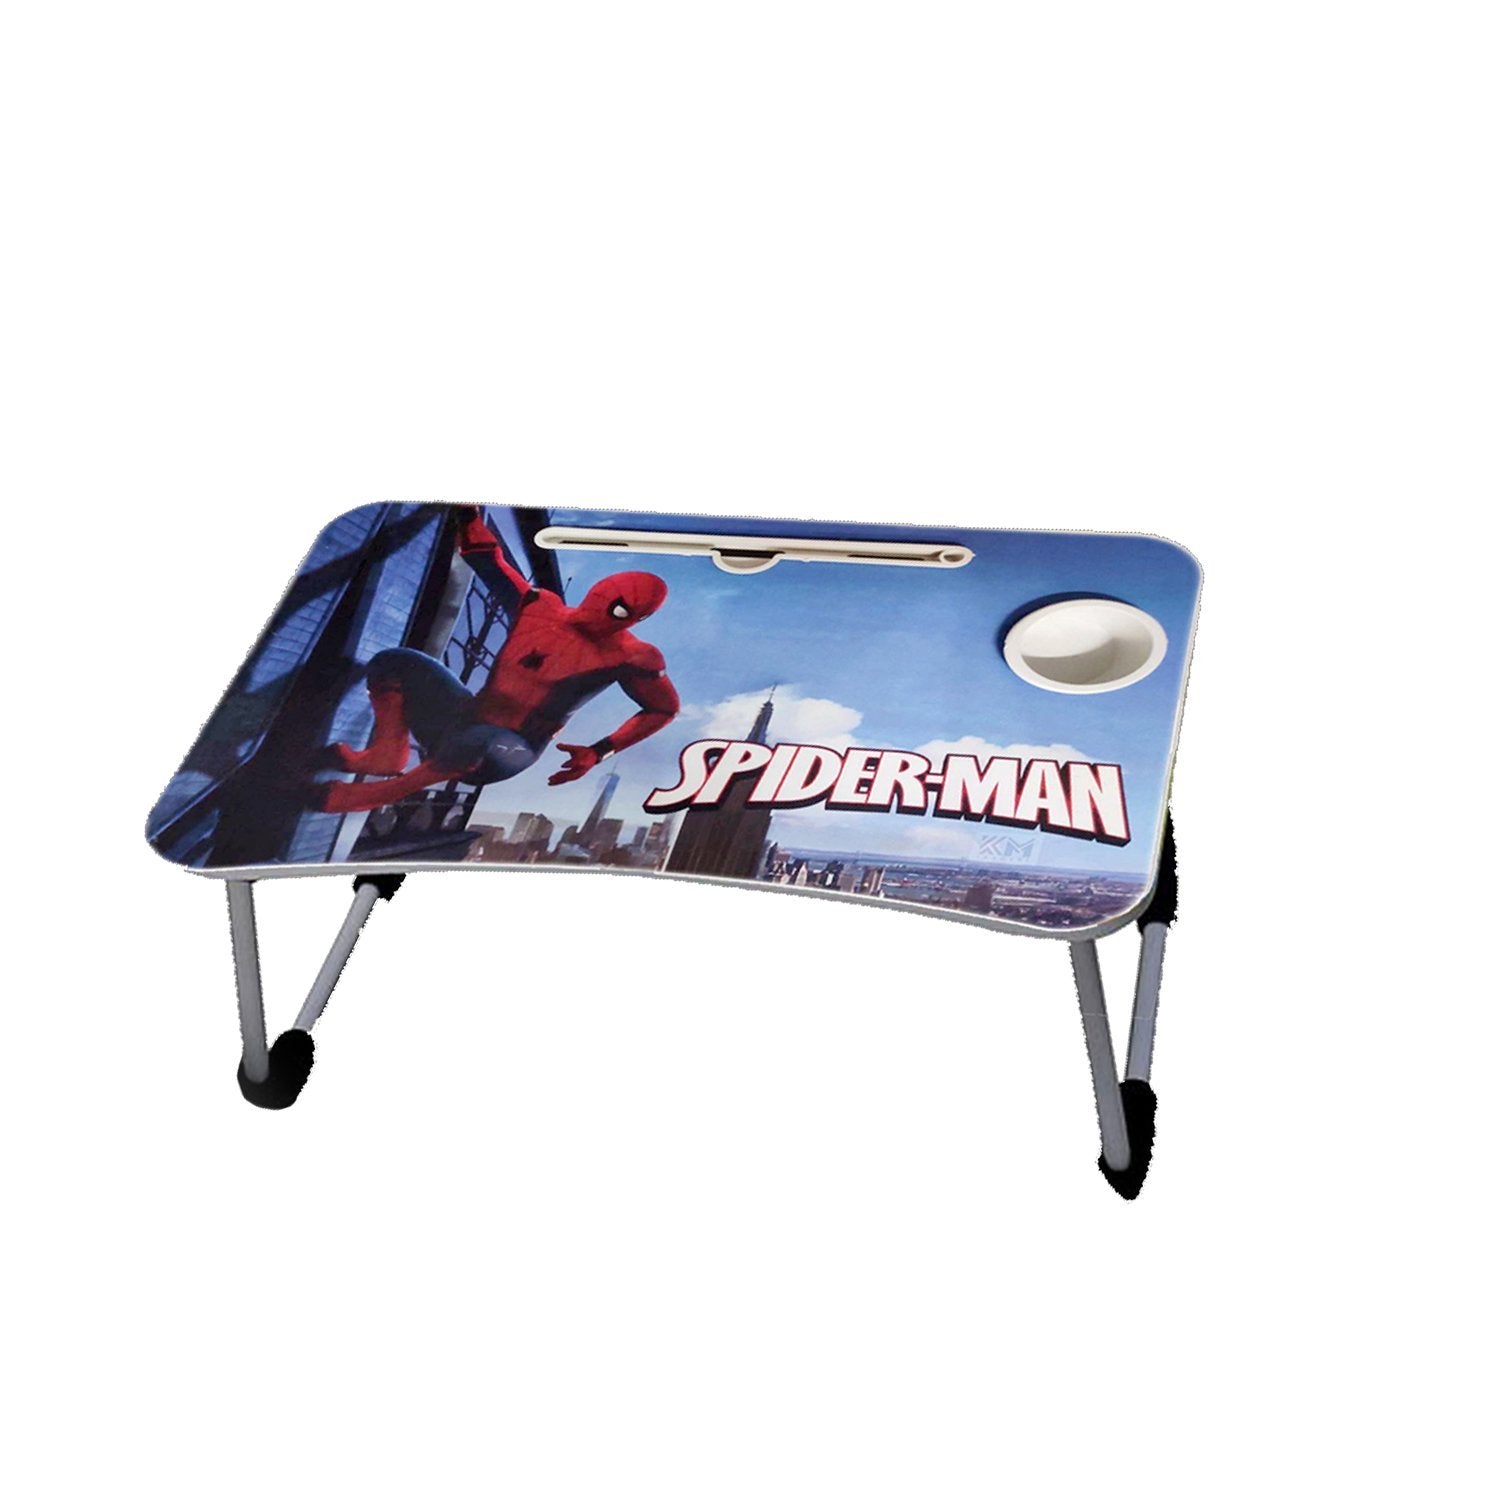 8029 SpiderMan Design Foldable Laptop Table For Study